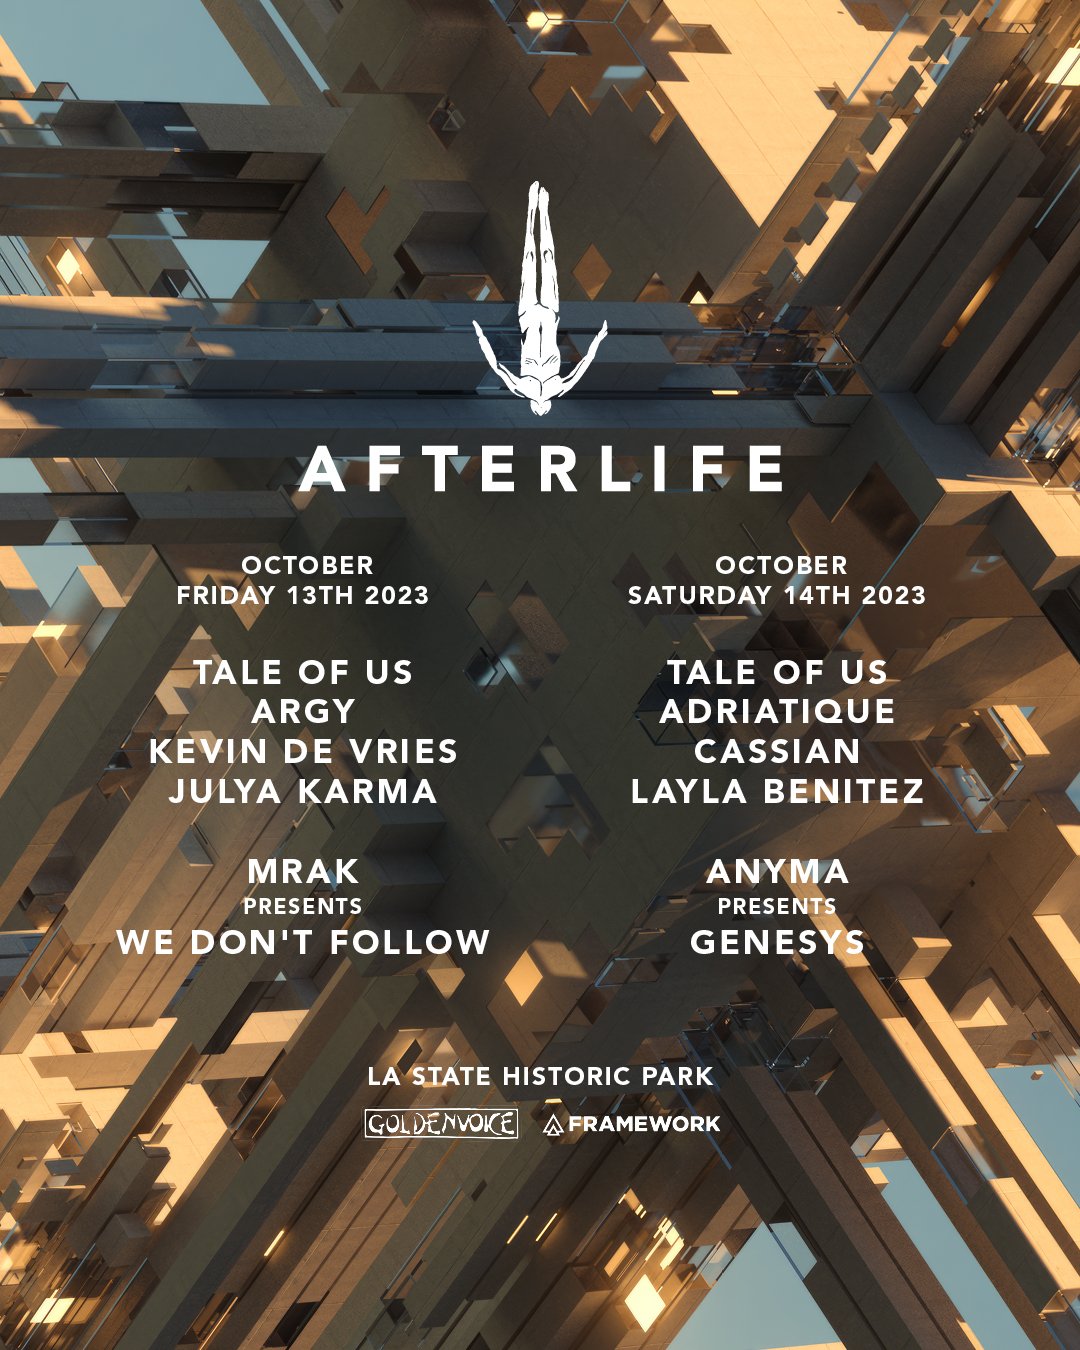 Afterlife Lineup - Miami Music Week : r/aves